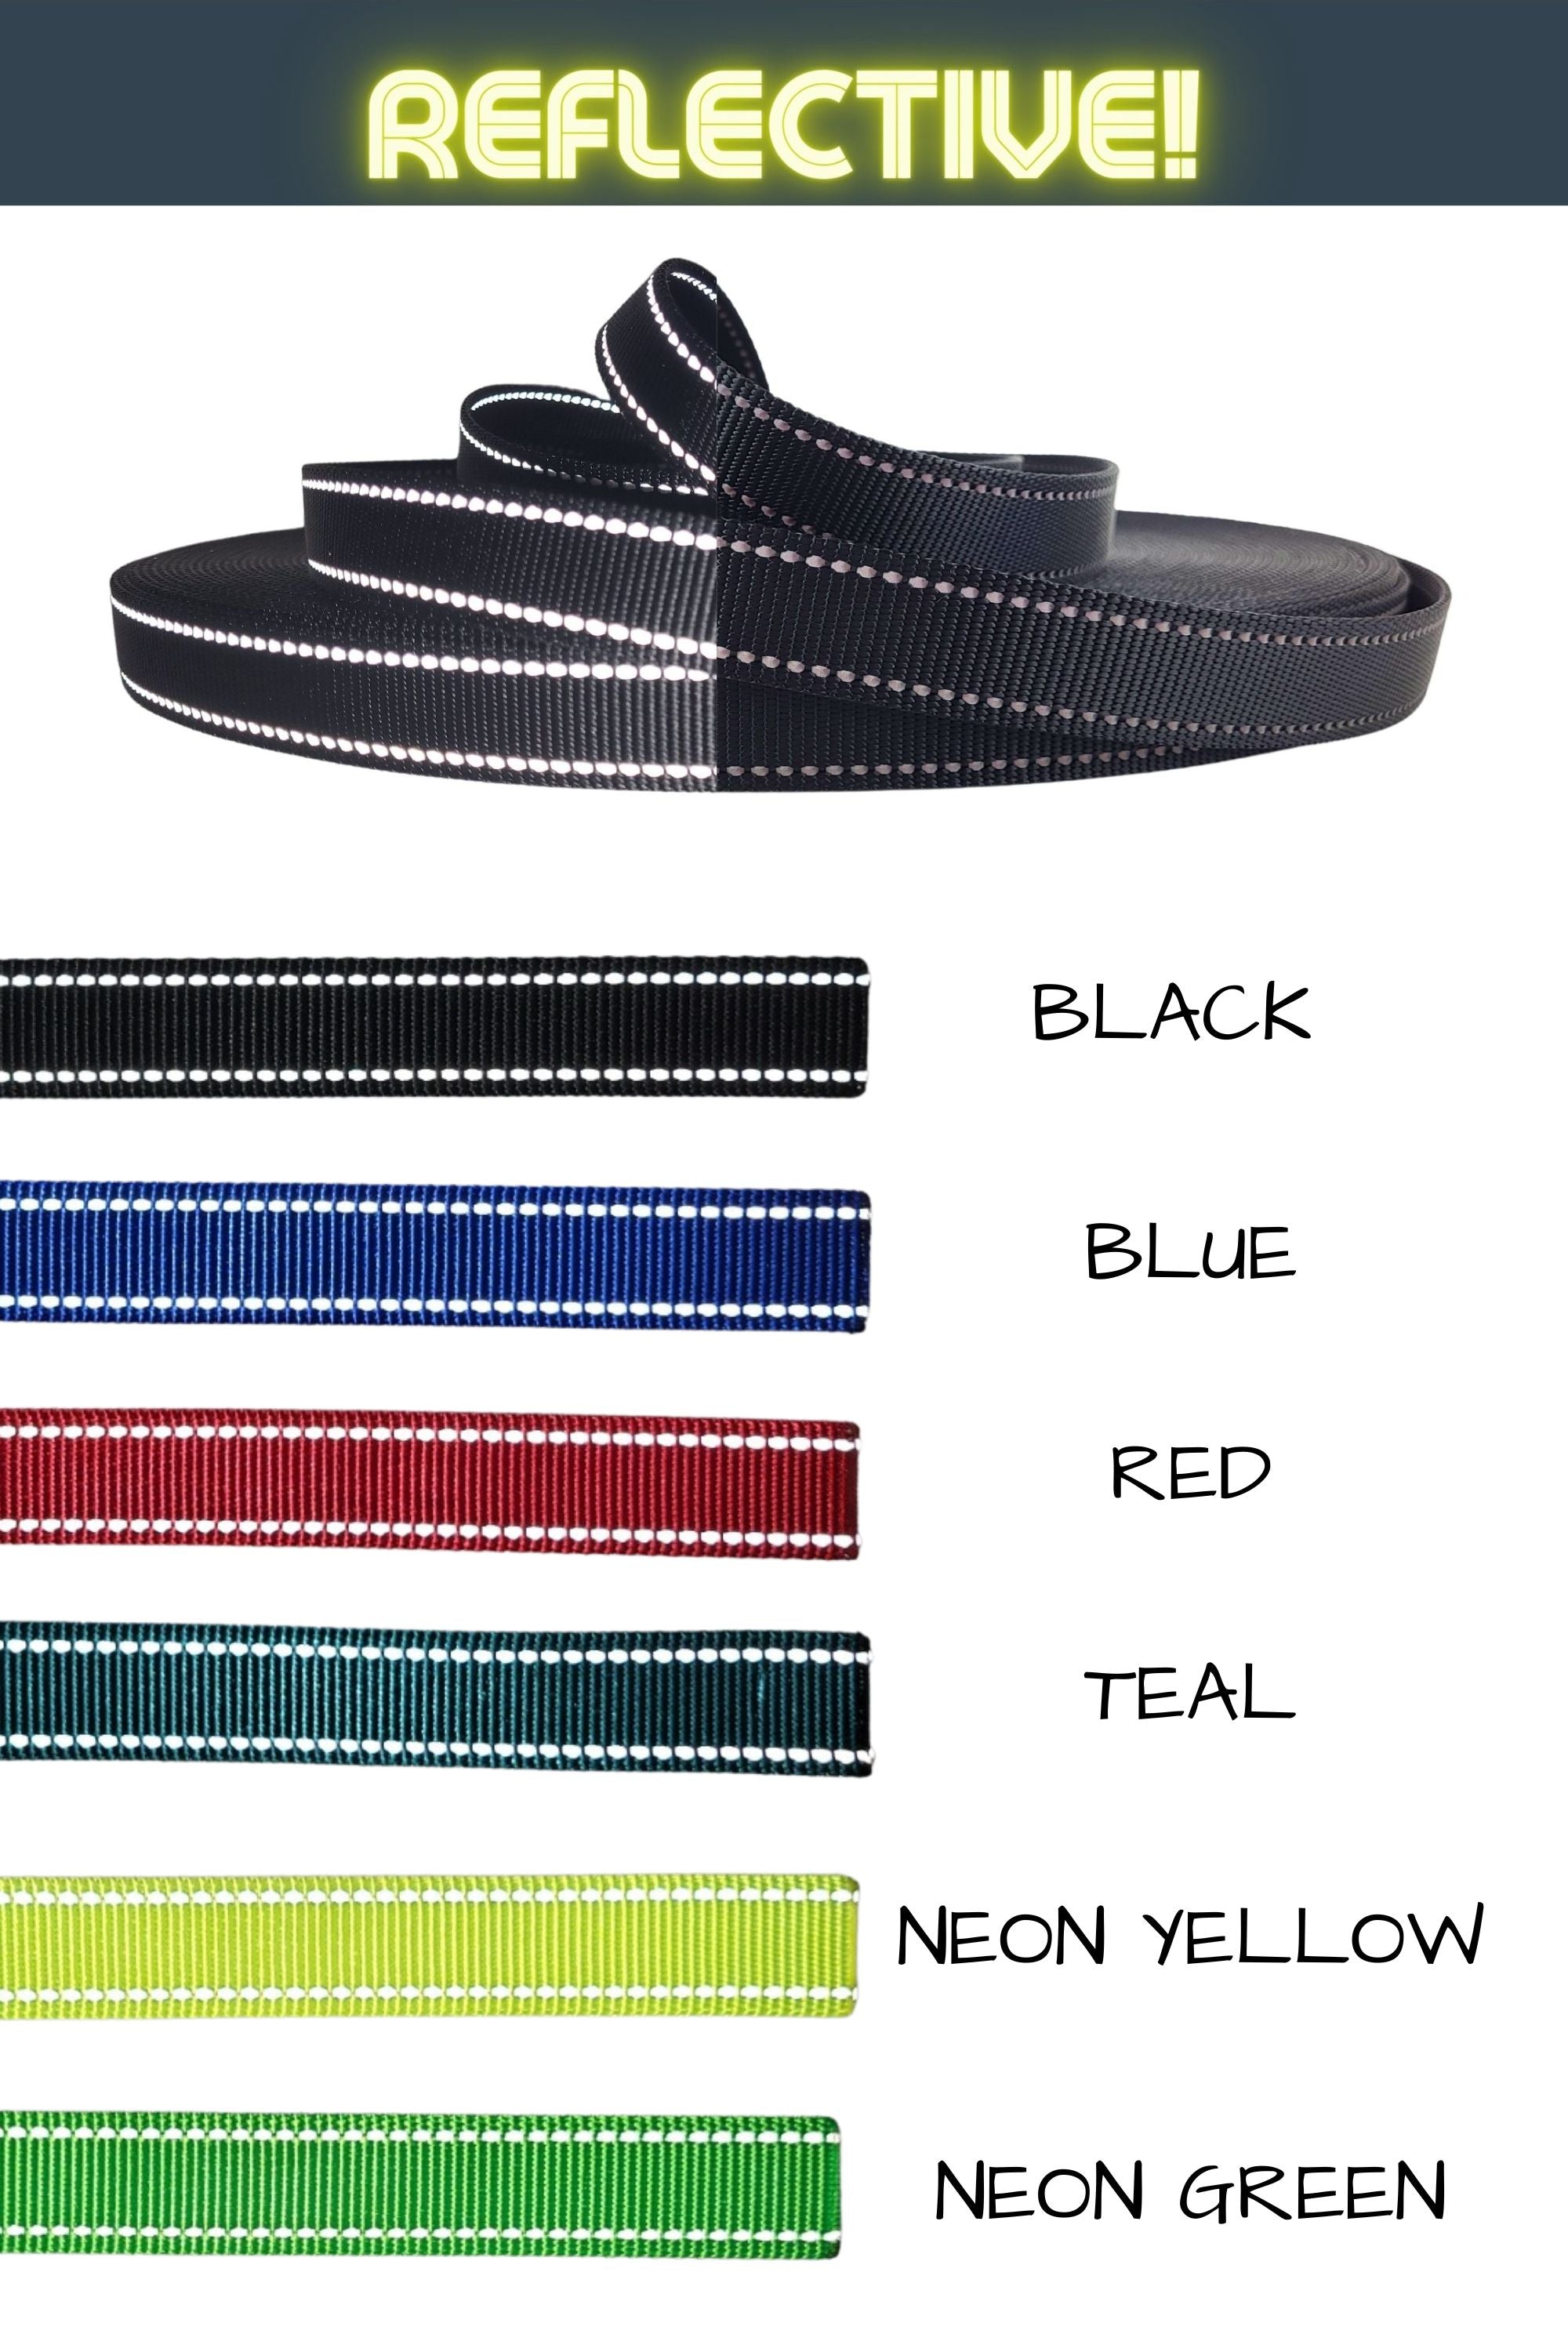 six colors are available in the reflective 3 in one adjustable convertible leash, including black, blue, red, teal, neon yellow, or neon green